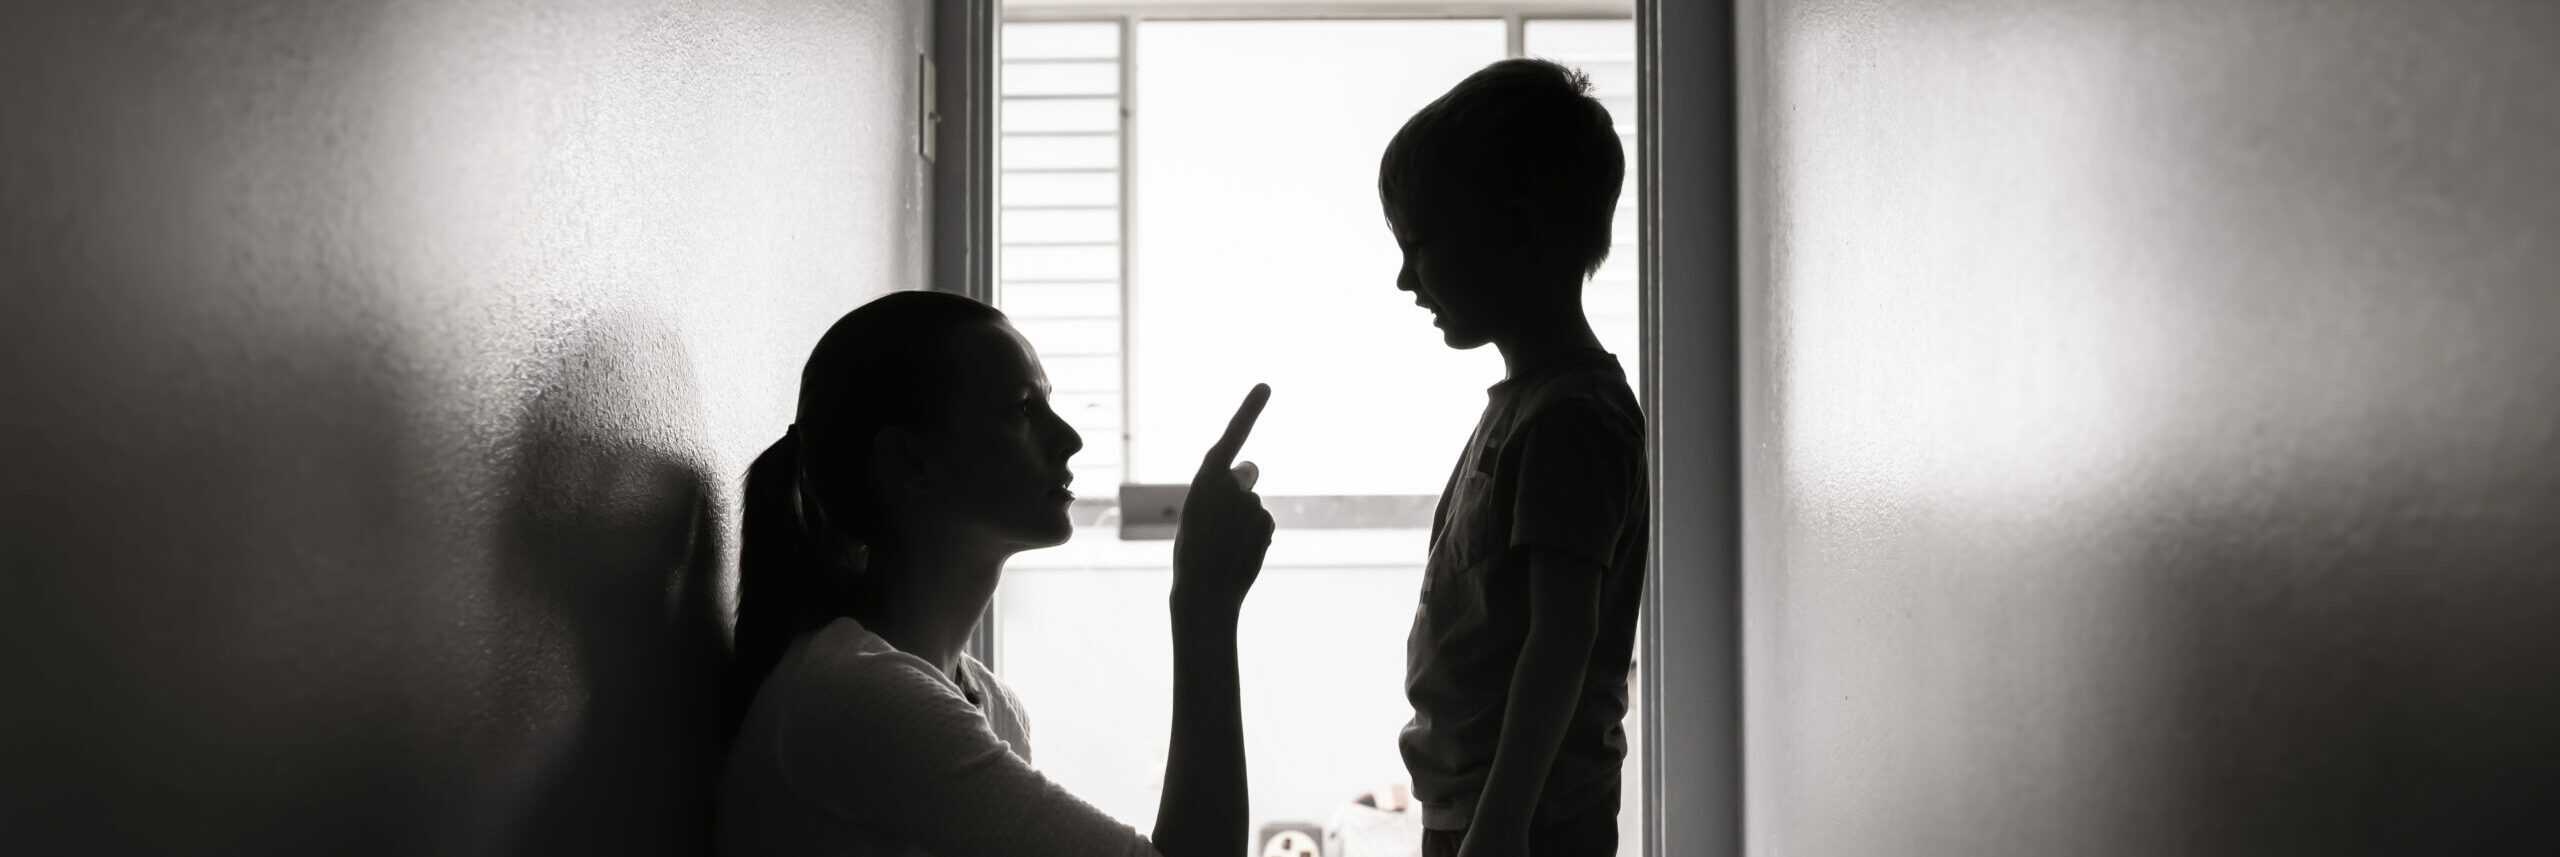 mother and child discipline perfectionism